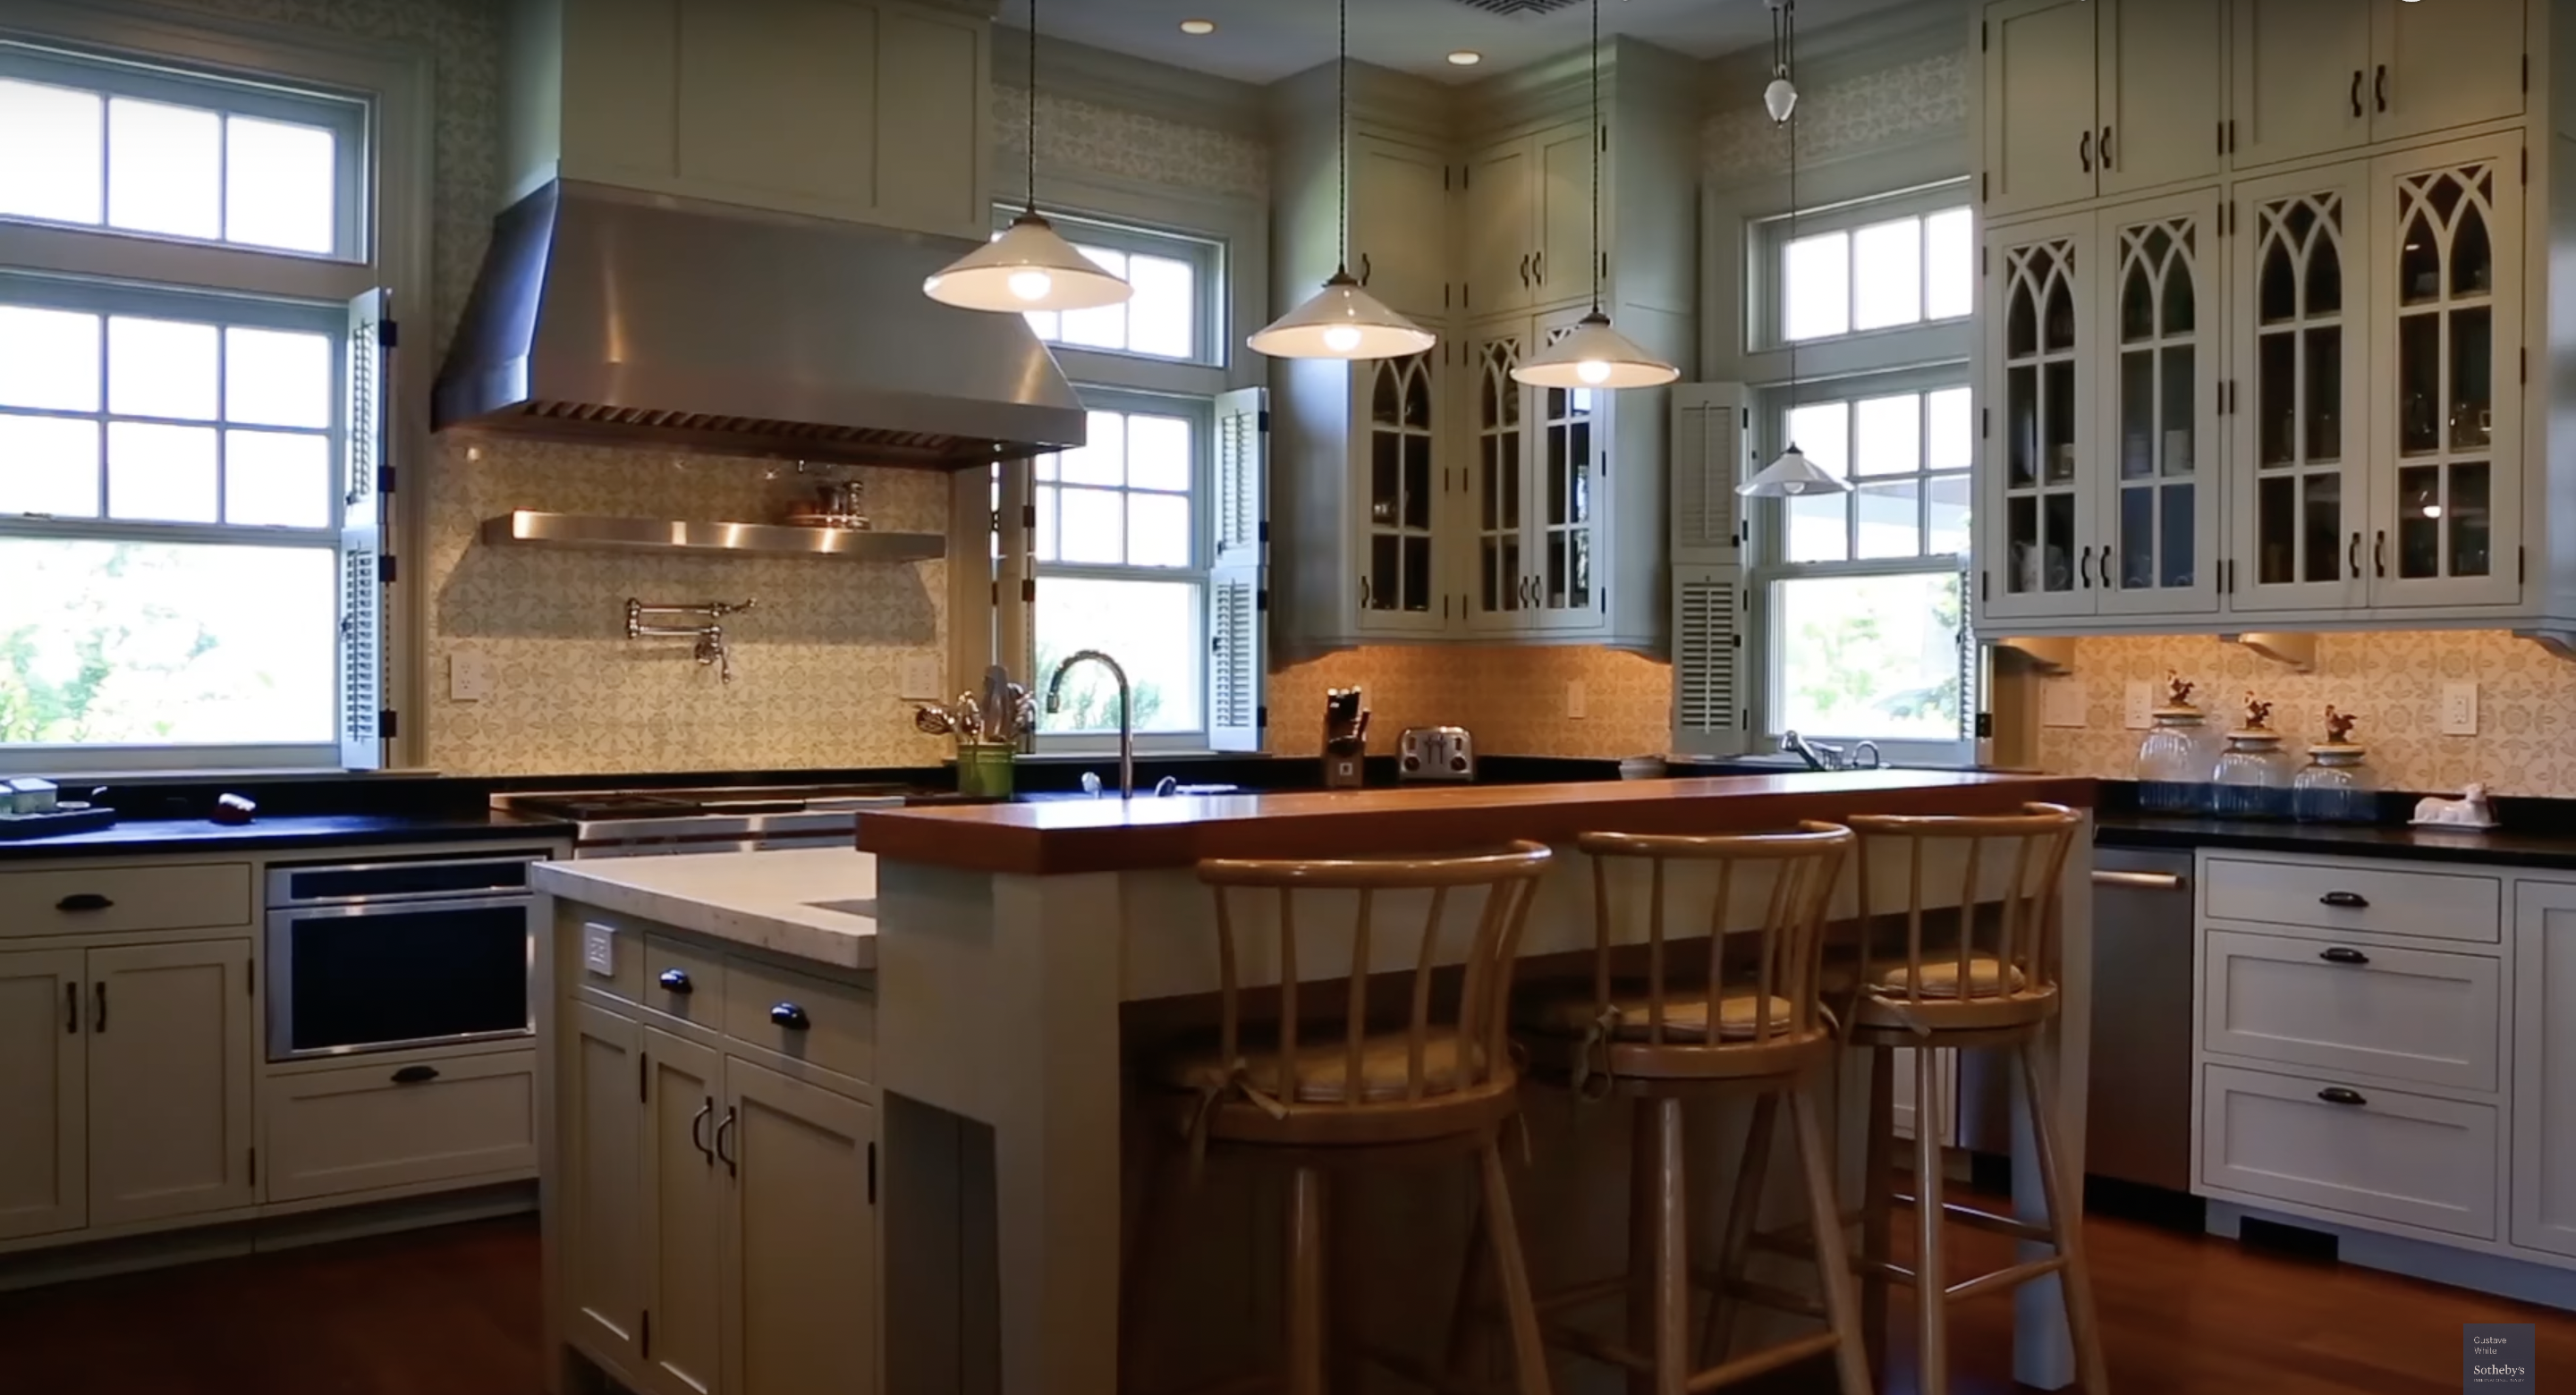 Inside Judge Judy's kitchen in her Newport, Rhode Island home | Source: Youtube.com/Gustave White Sotheby's International Realty